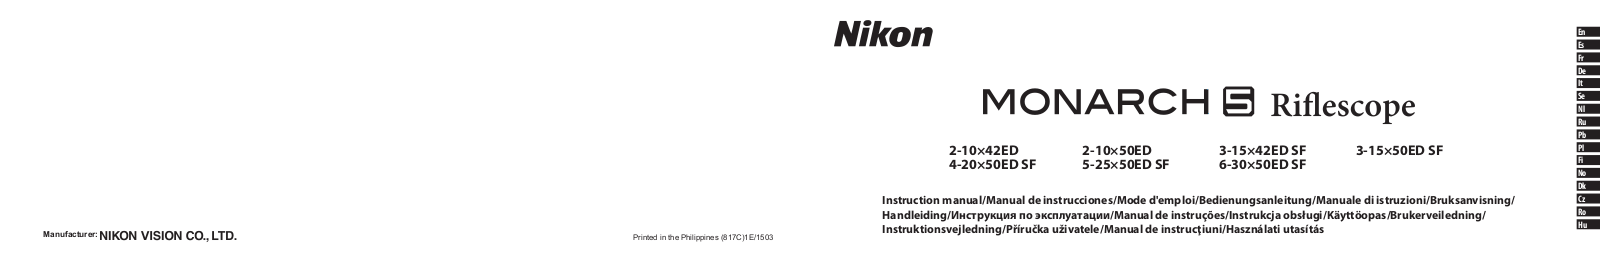 Nikon MONARCH 5 Riflescope Instructions for use